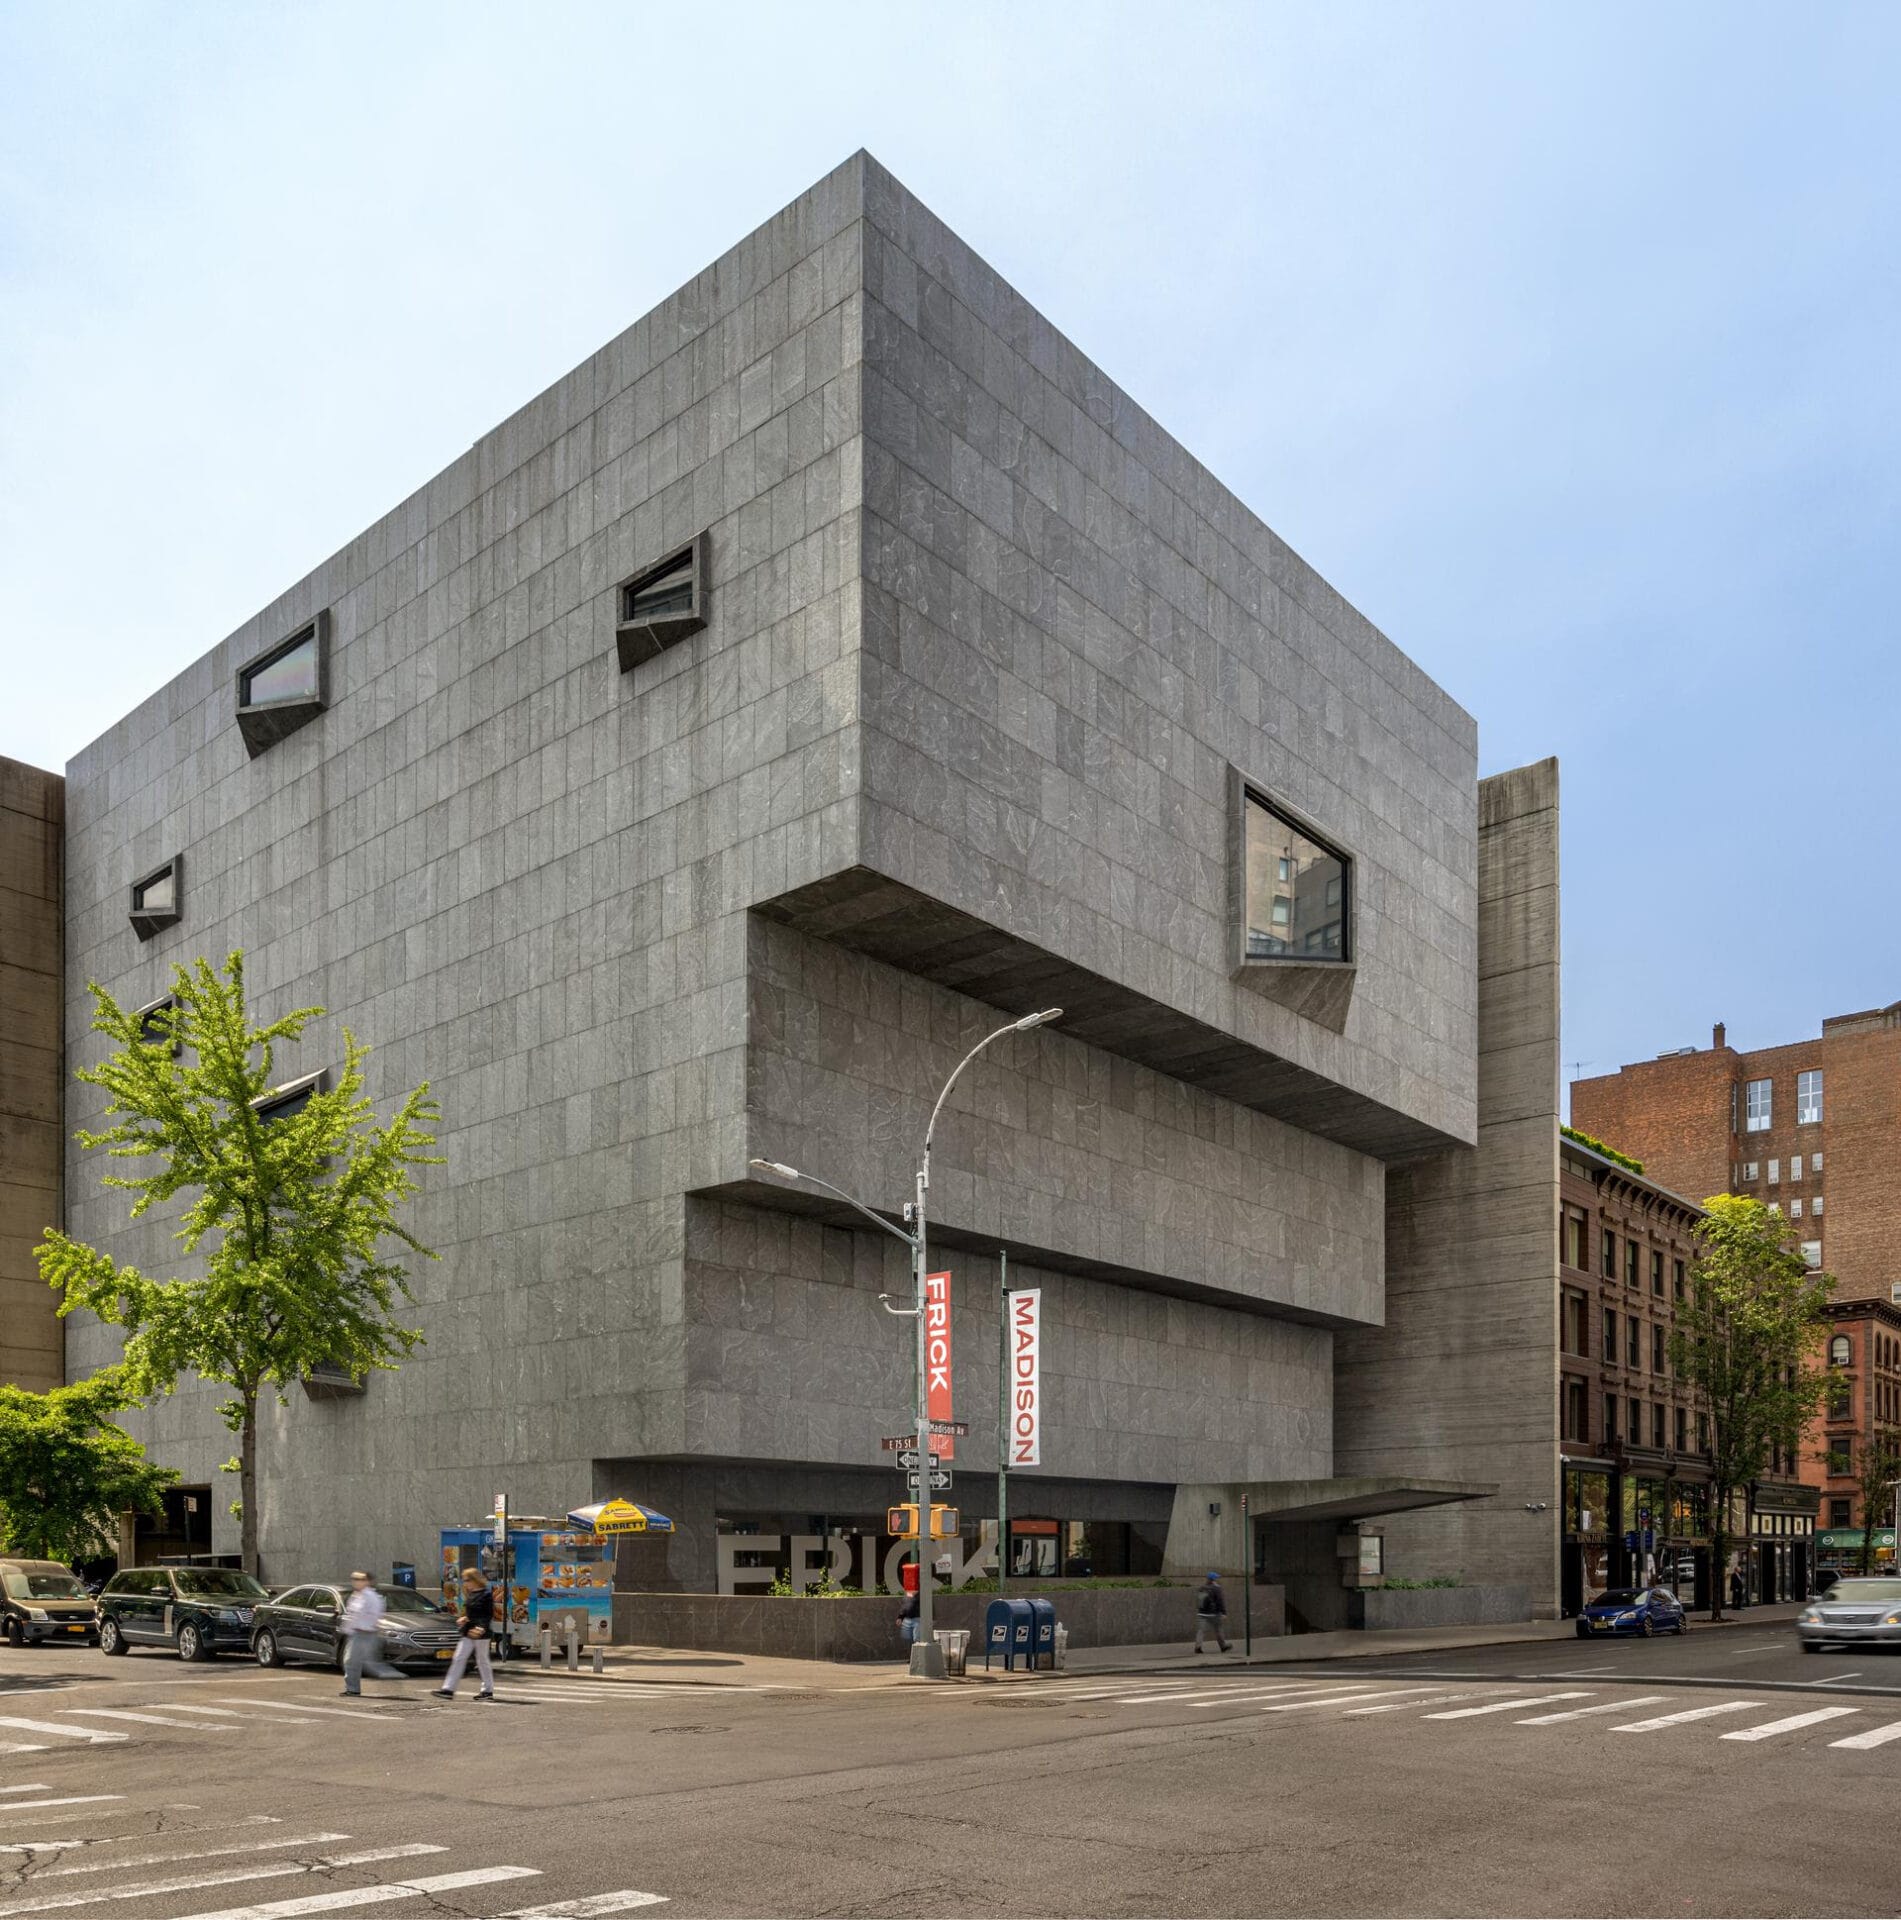 Exterior of the Breuer Building. Photo by Max Touhey. Credit: Courtesy Sotheby’s